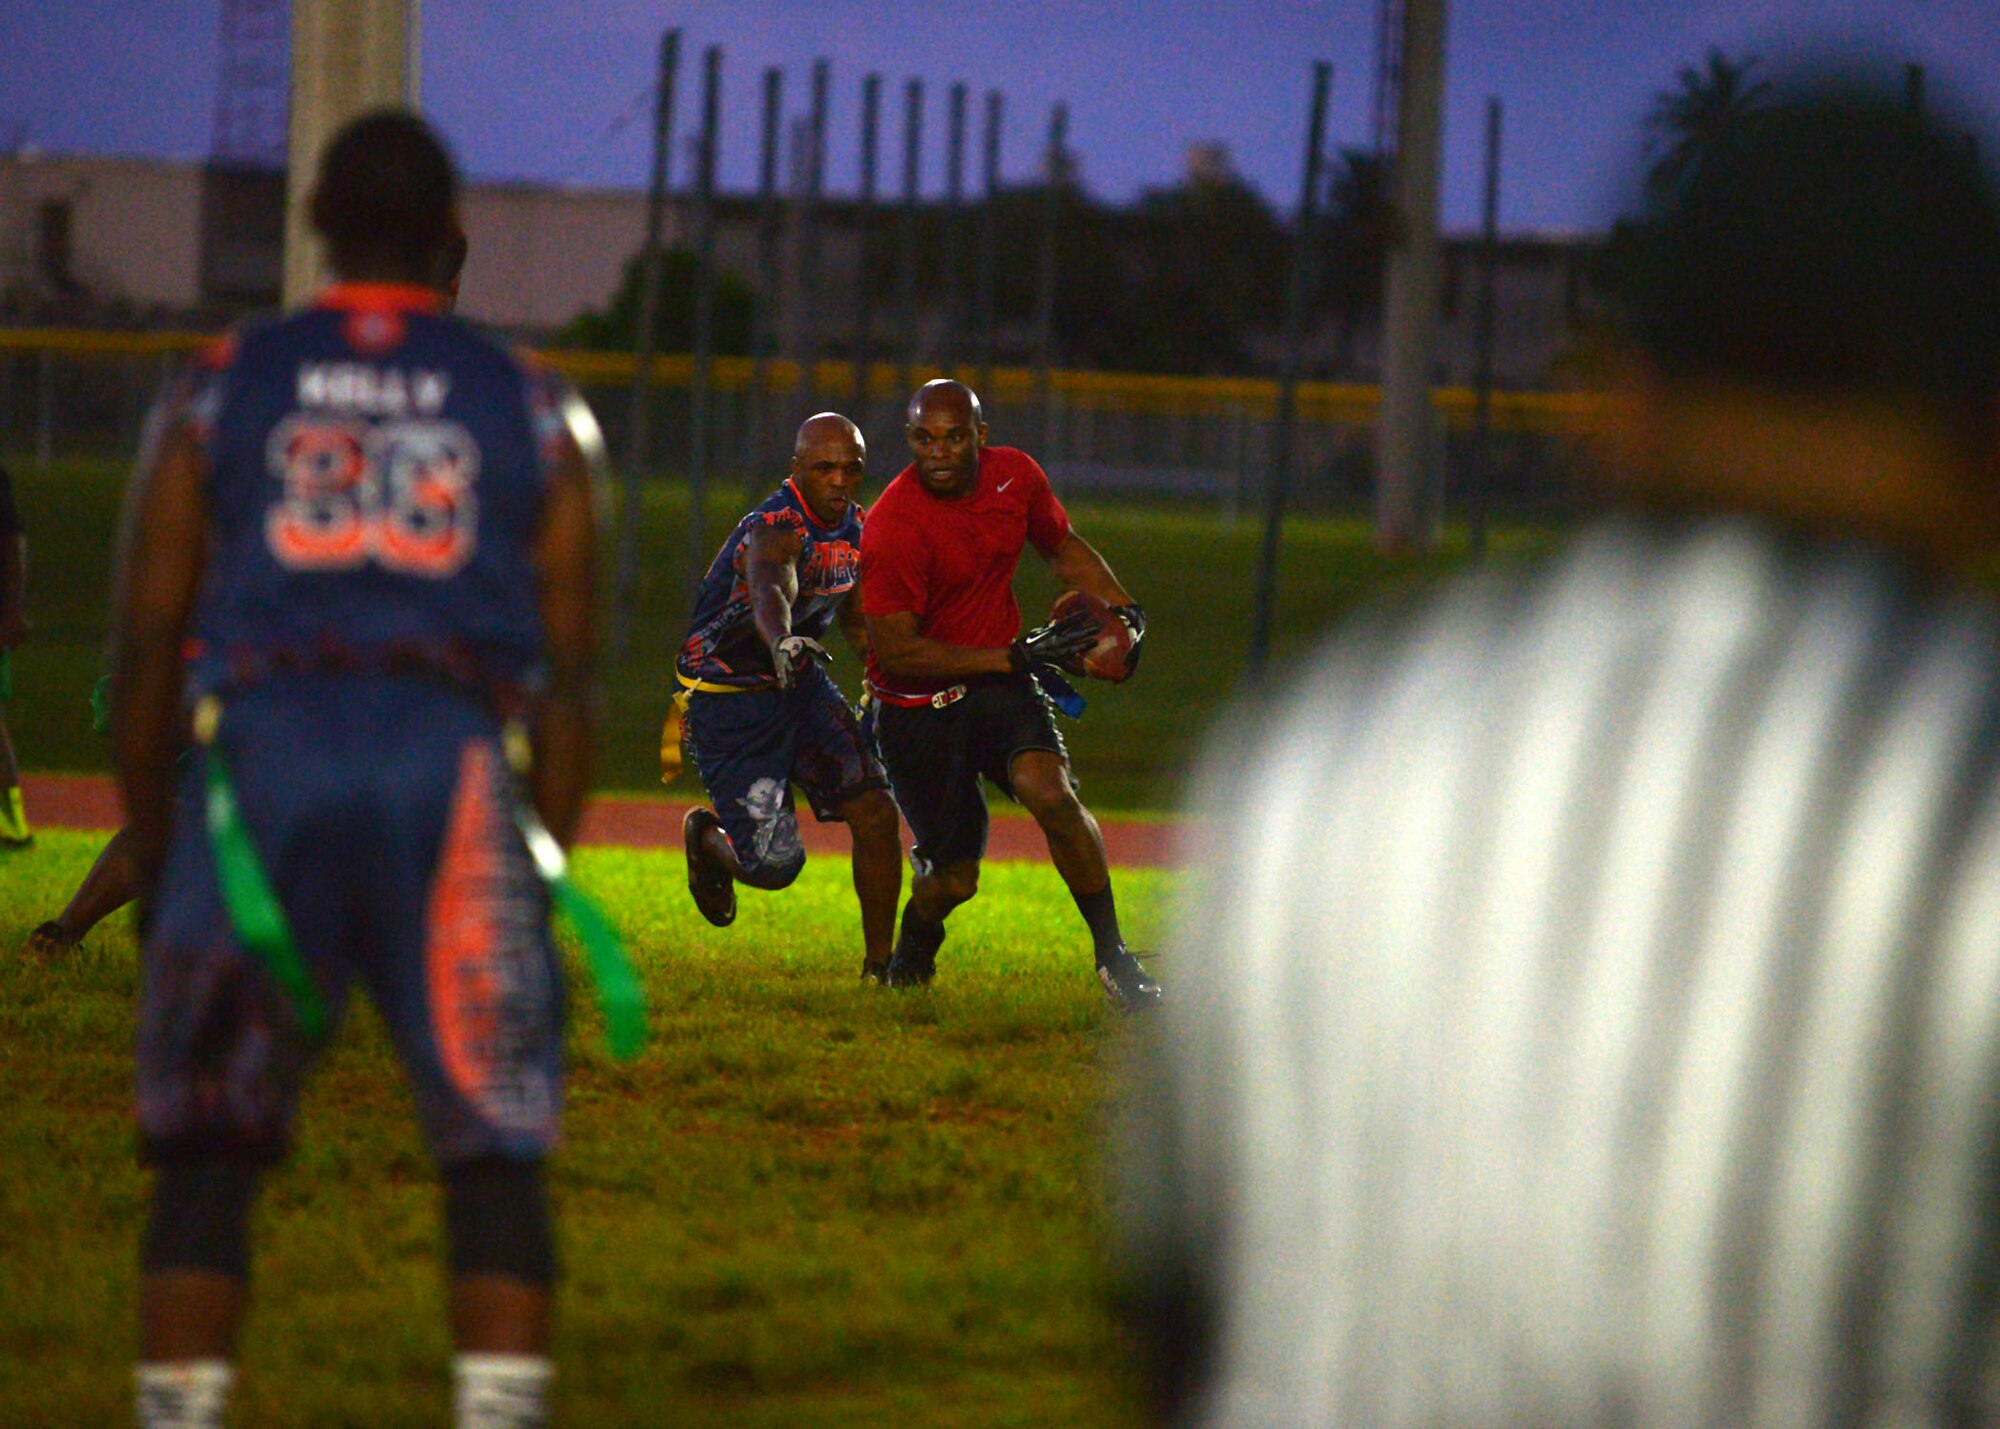 A 664th Combat Communications Squadron attempts to run for a first down during the flag football championship, April 20, 2015. The 36th SFS defeated the 664th CBCS 14-0 in the championship. (U.S. Air Force photo by Airman 1st Class Joshua Smoot/Released)